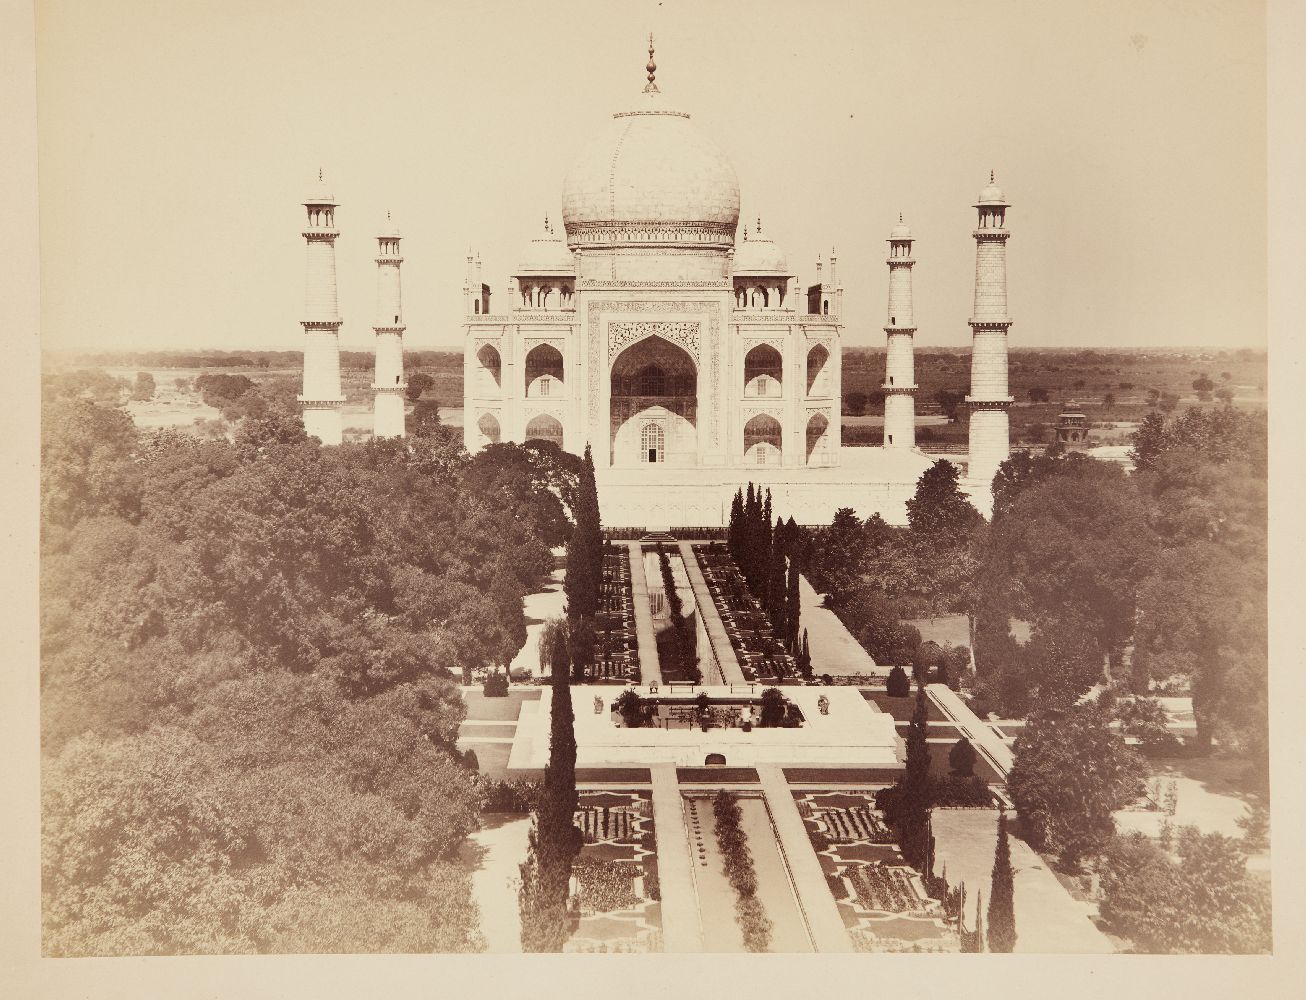 A black and white photograph of the Taj Mahal, Agra, India, early 20th century, shown from the - Image 2 of 3